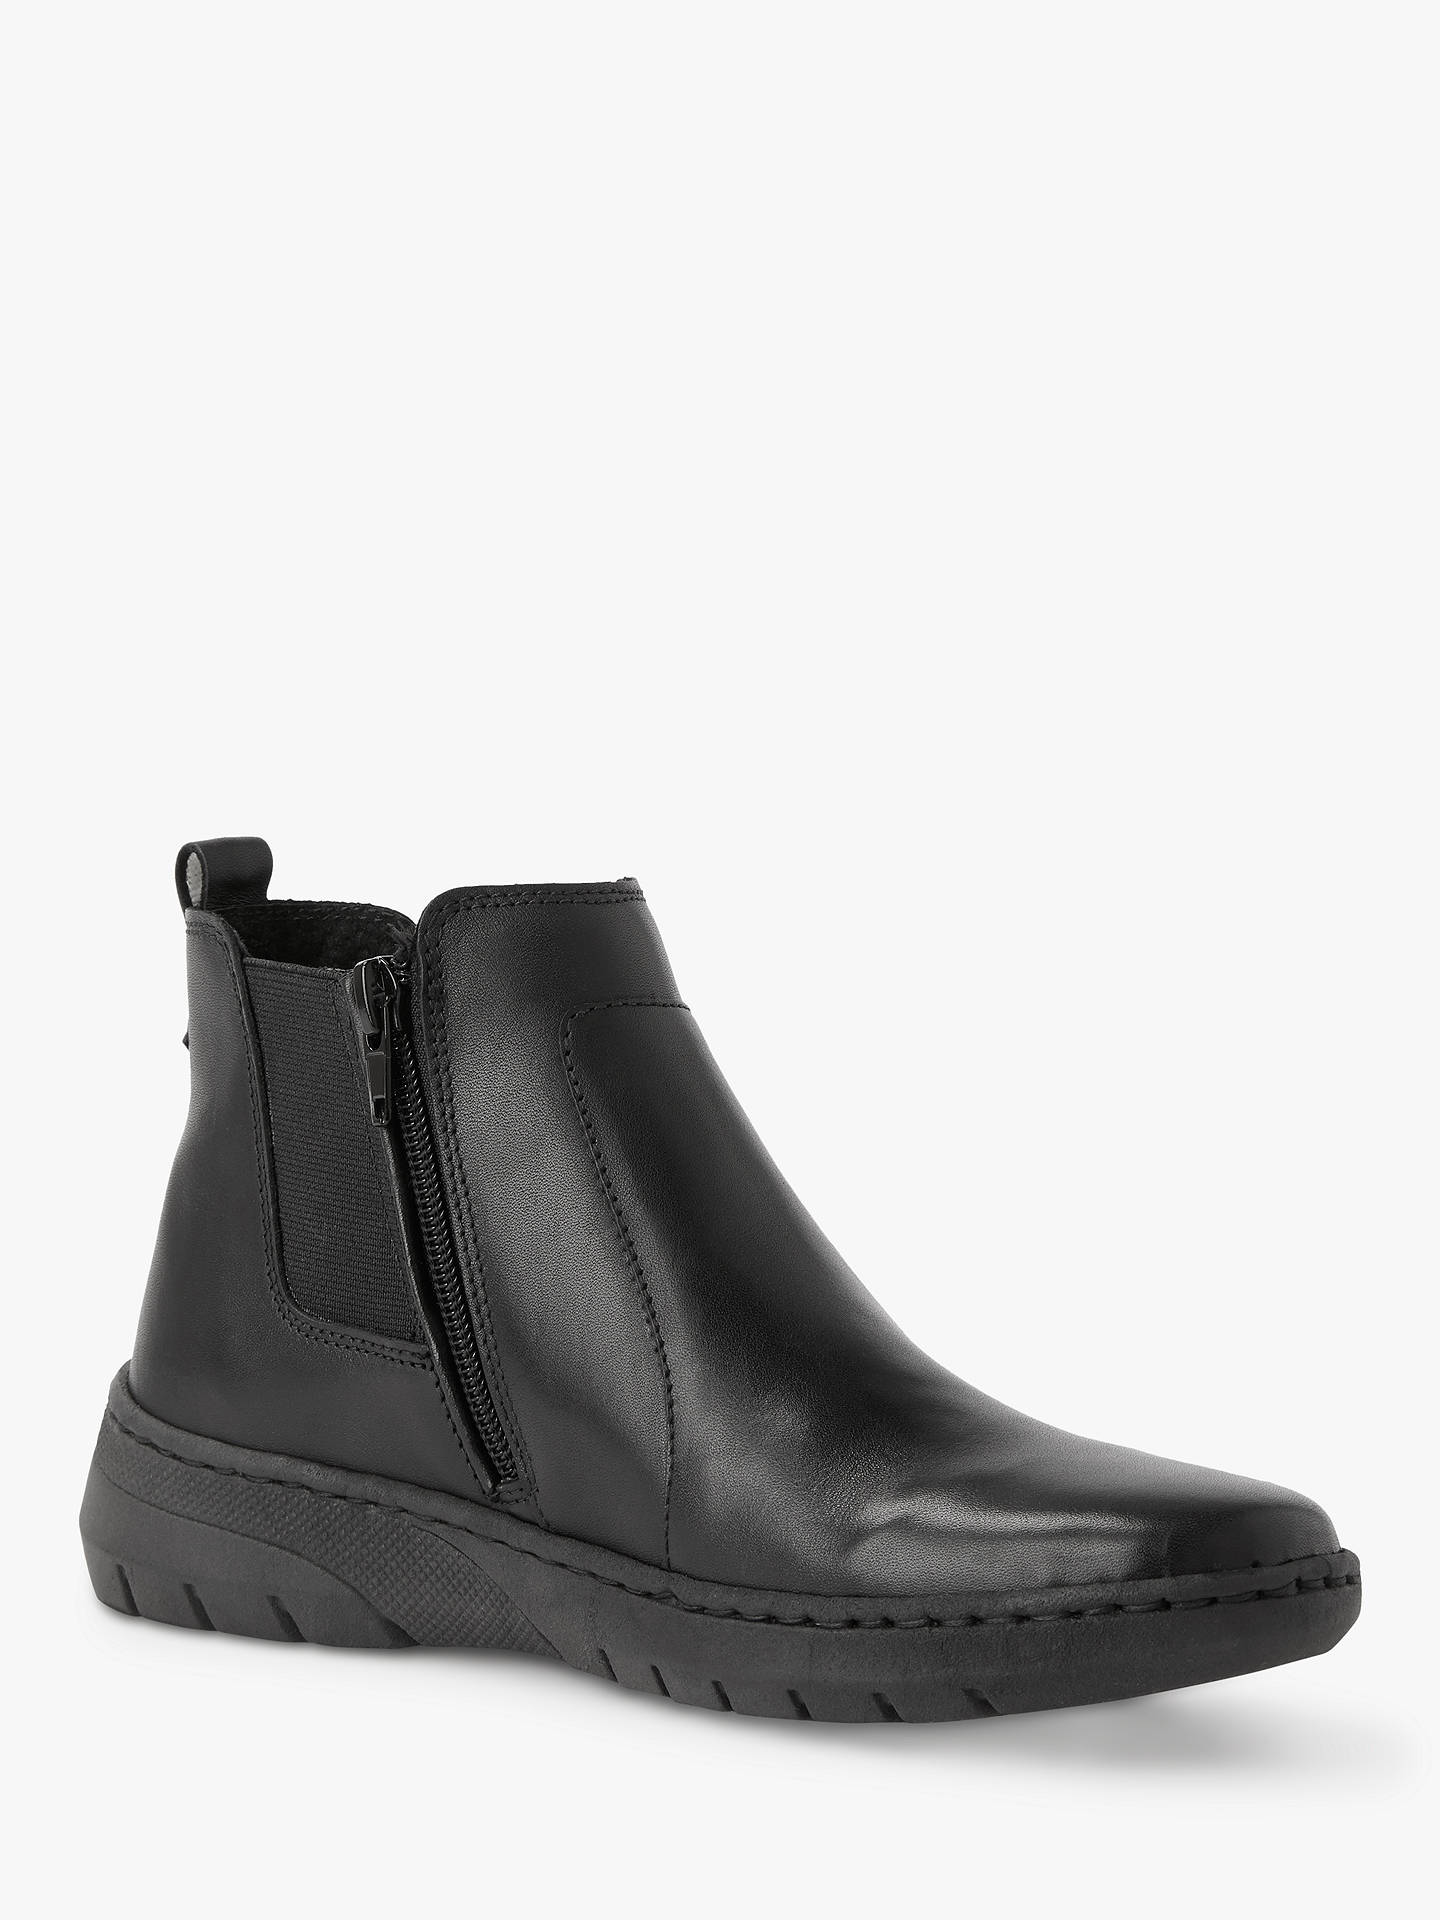 John Lewis & Partners Designed for Comfort Yale Flat Ankle Boots ...